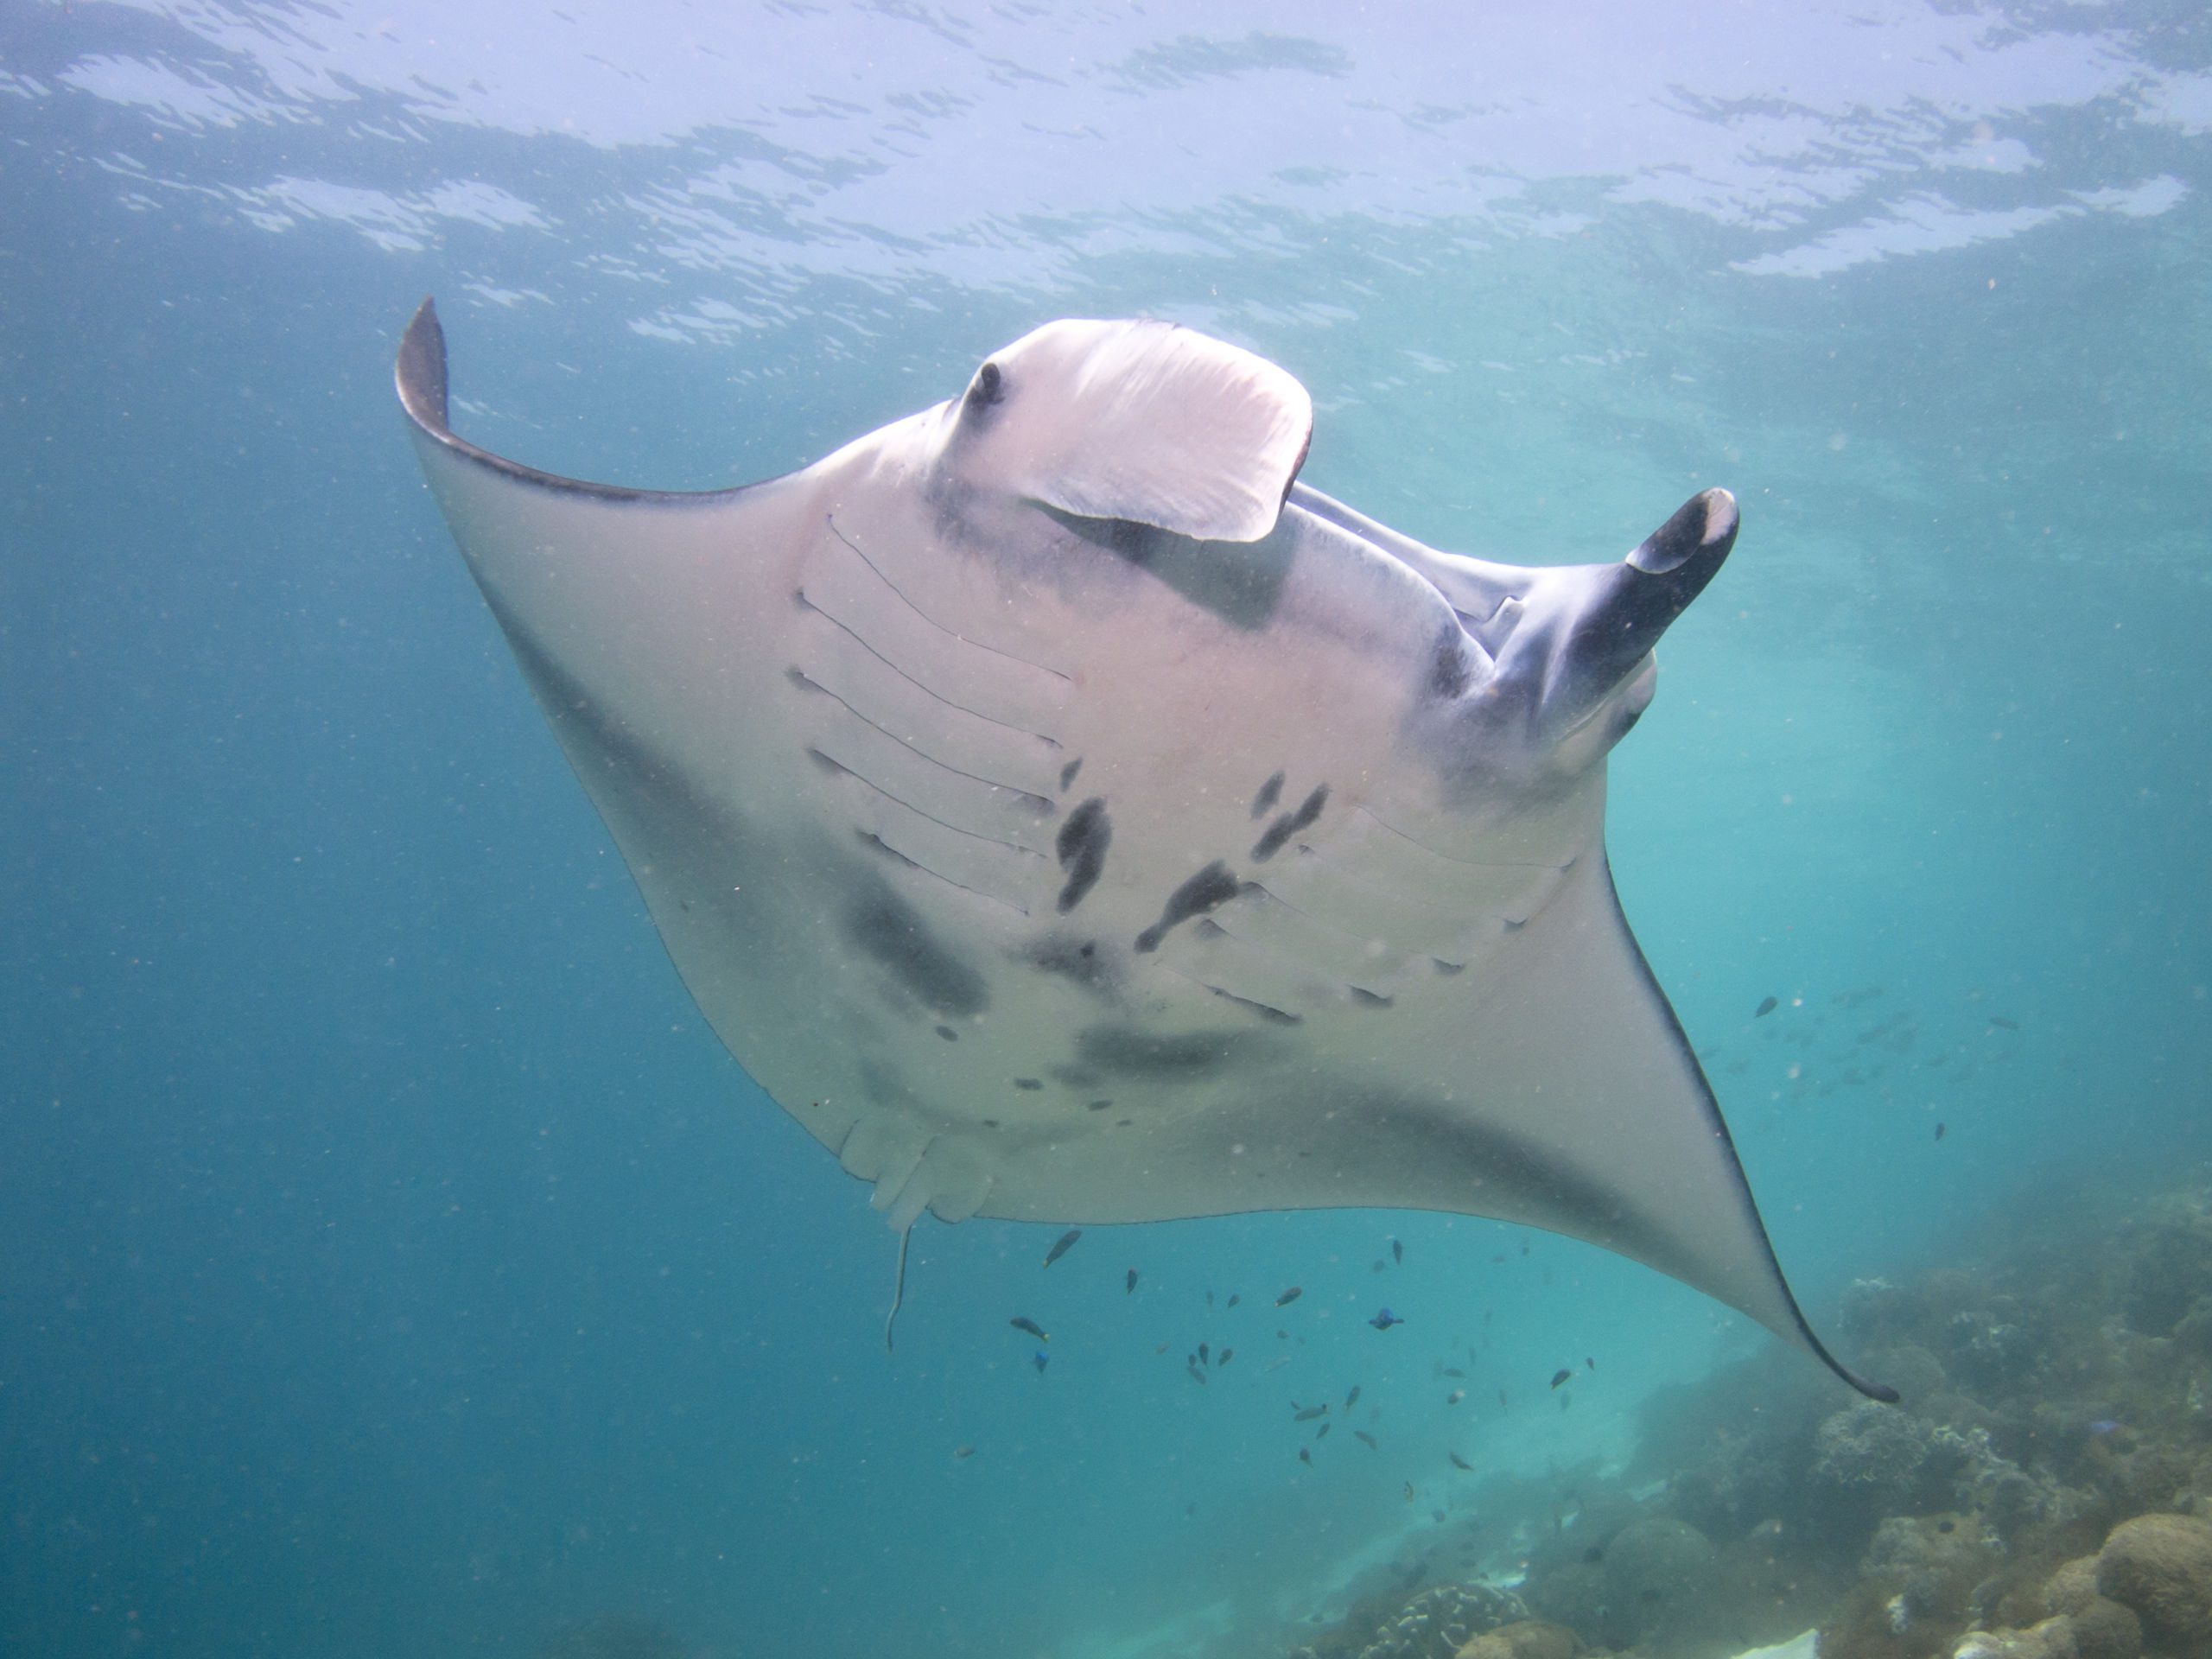 Manta on cleaning station in Komodo National Park